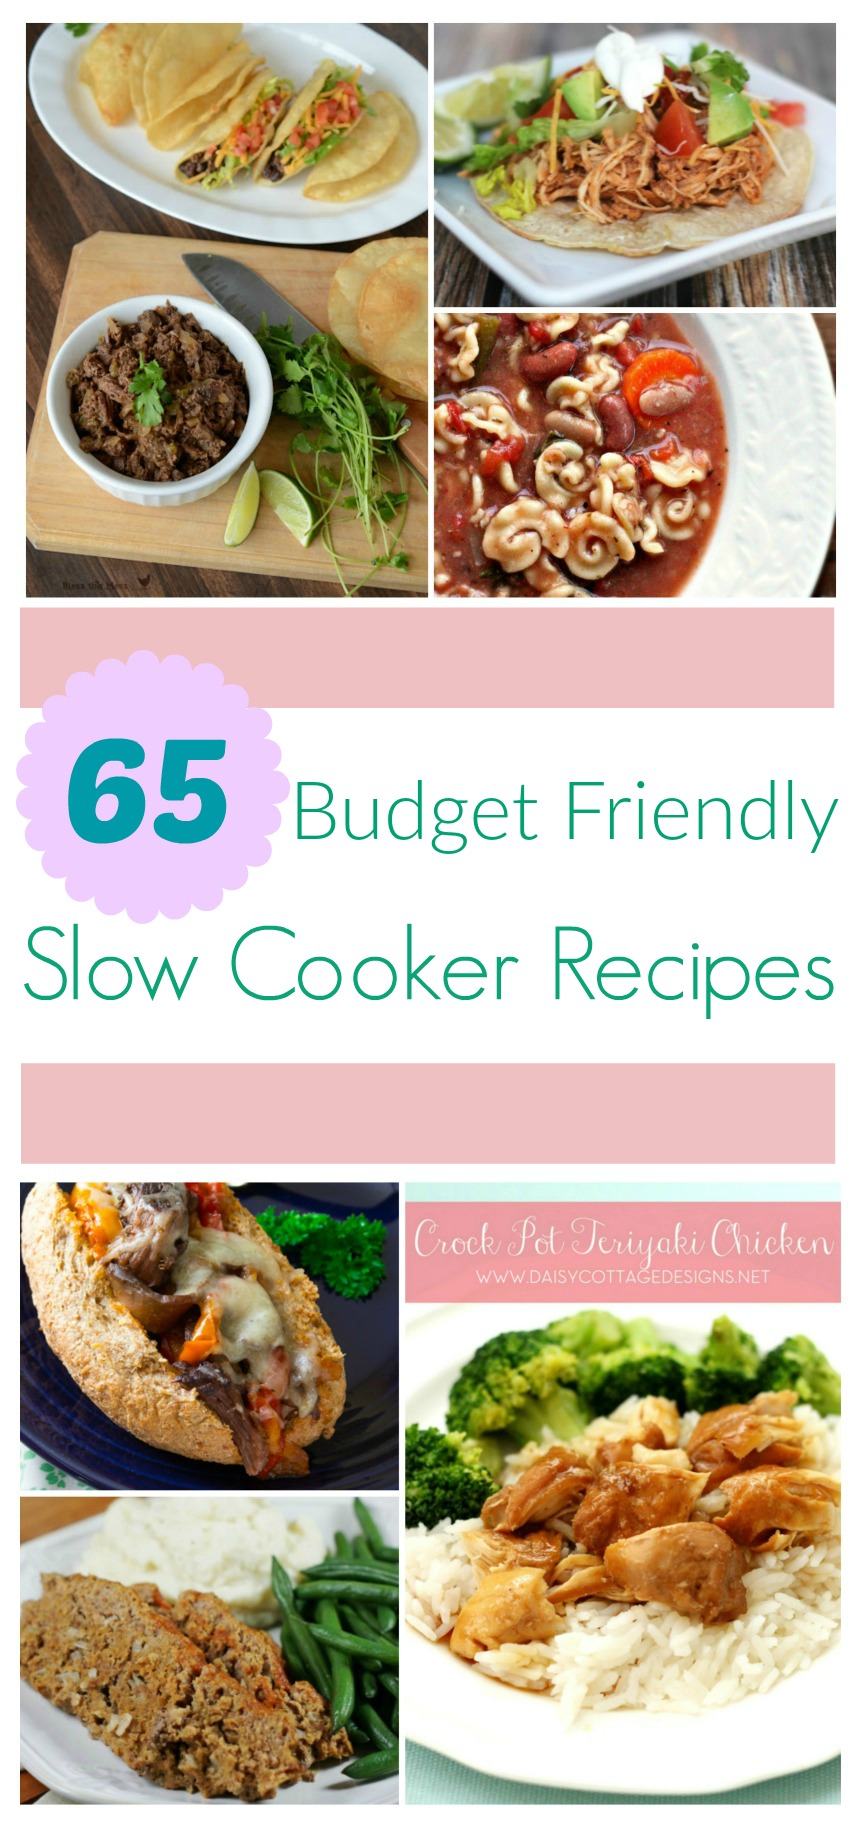 65 Budget Friendly Slow Cooker Recipes | Budget Earth